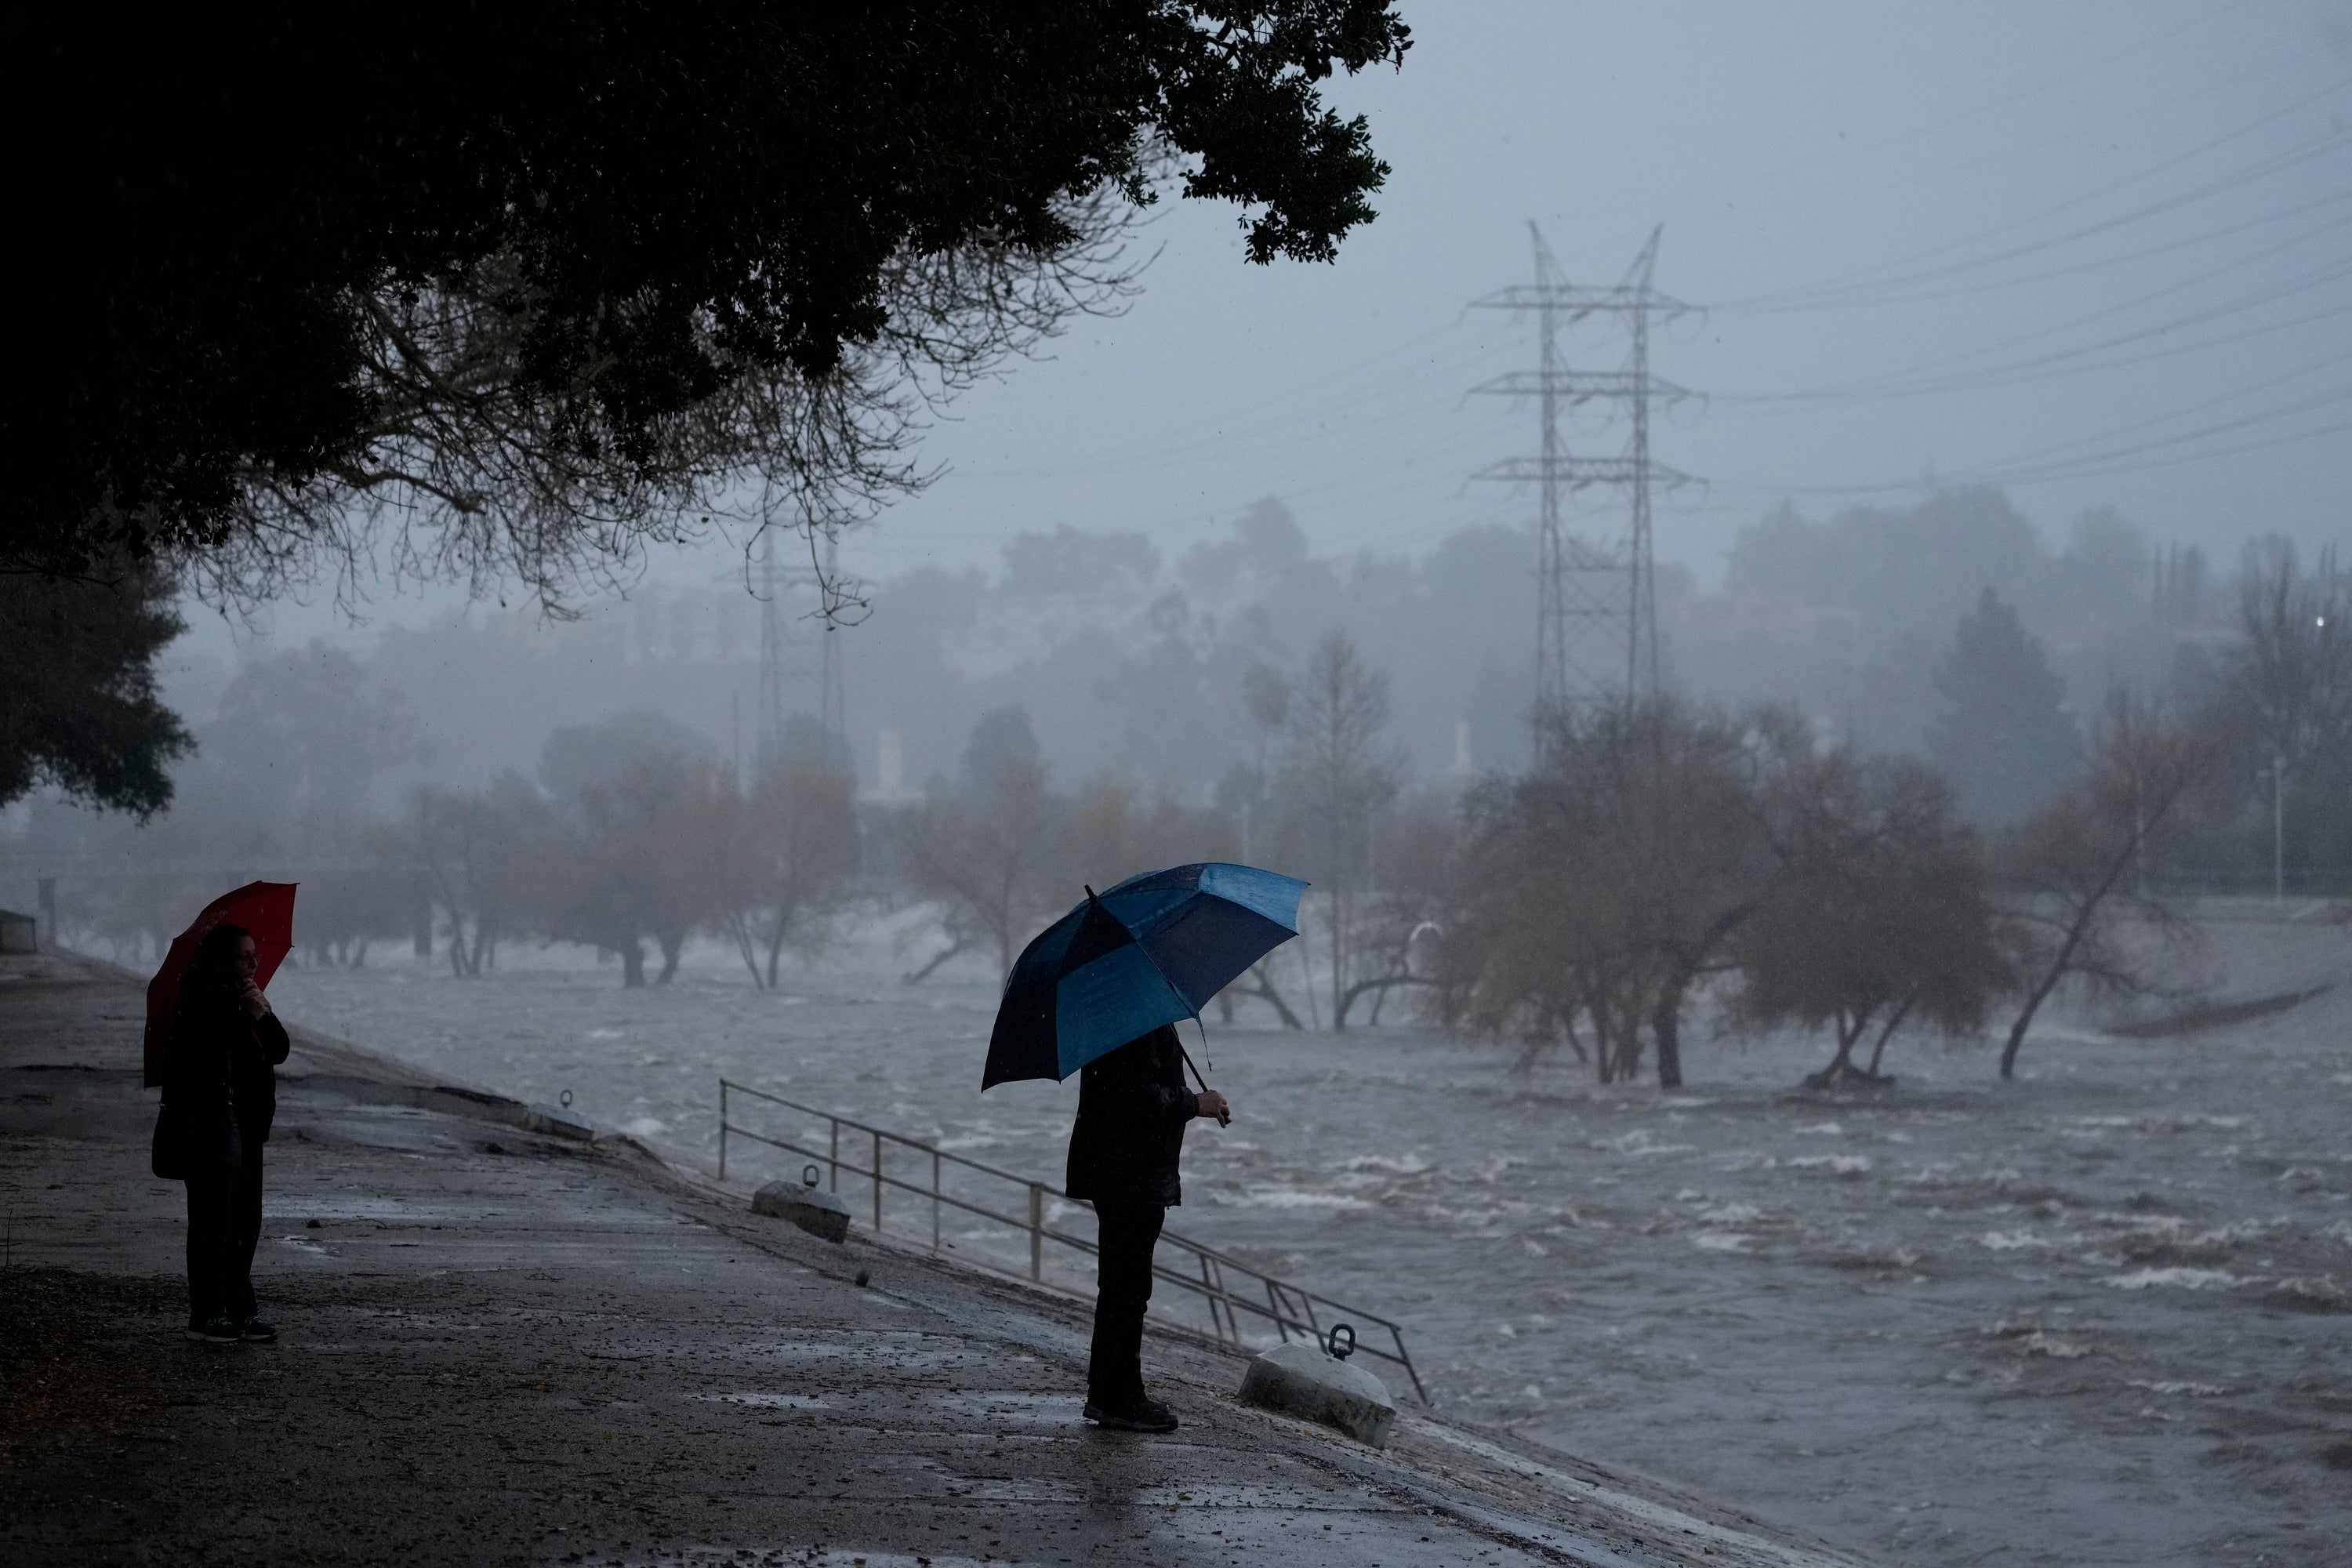 Two people observe heavy flooding and rain in California